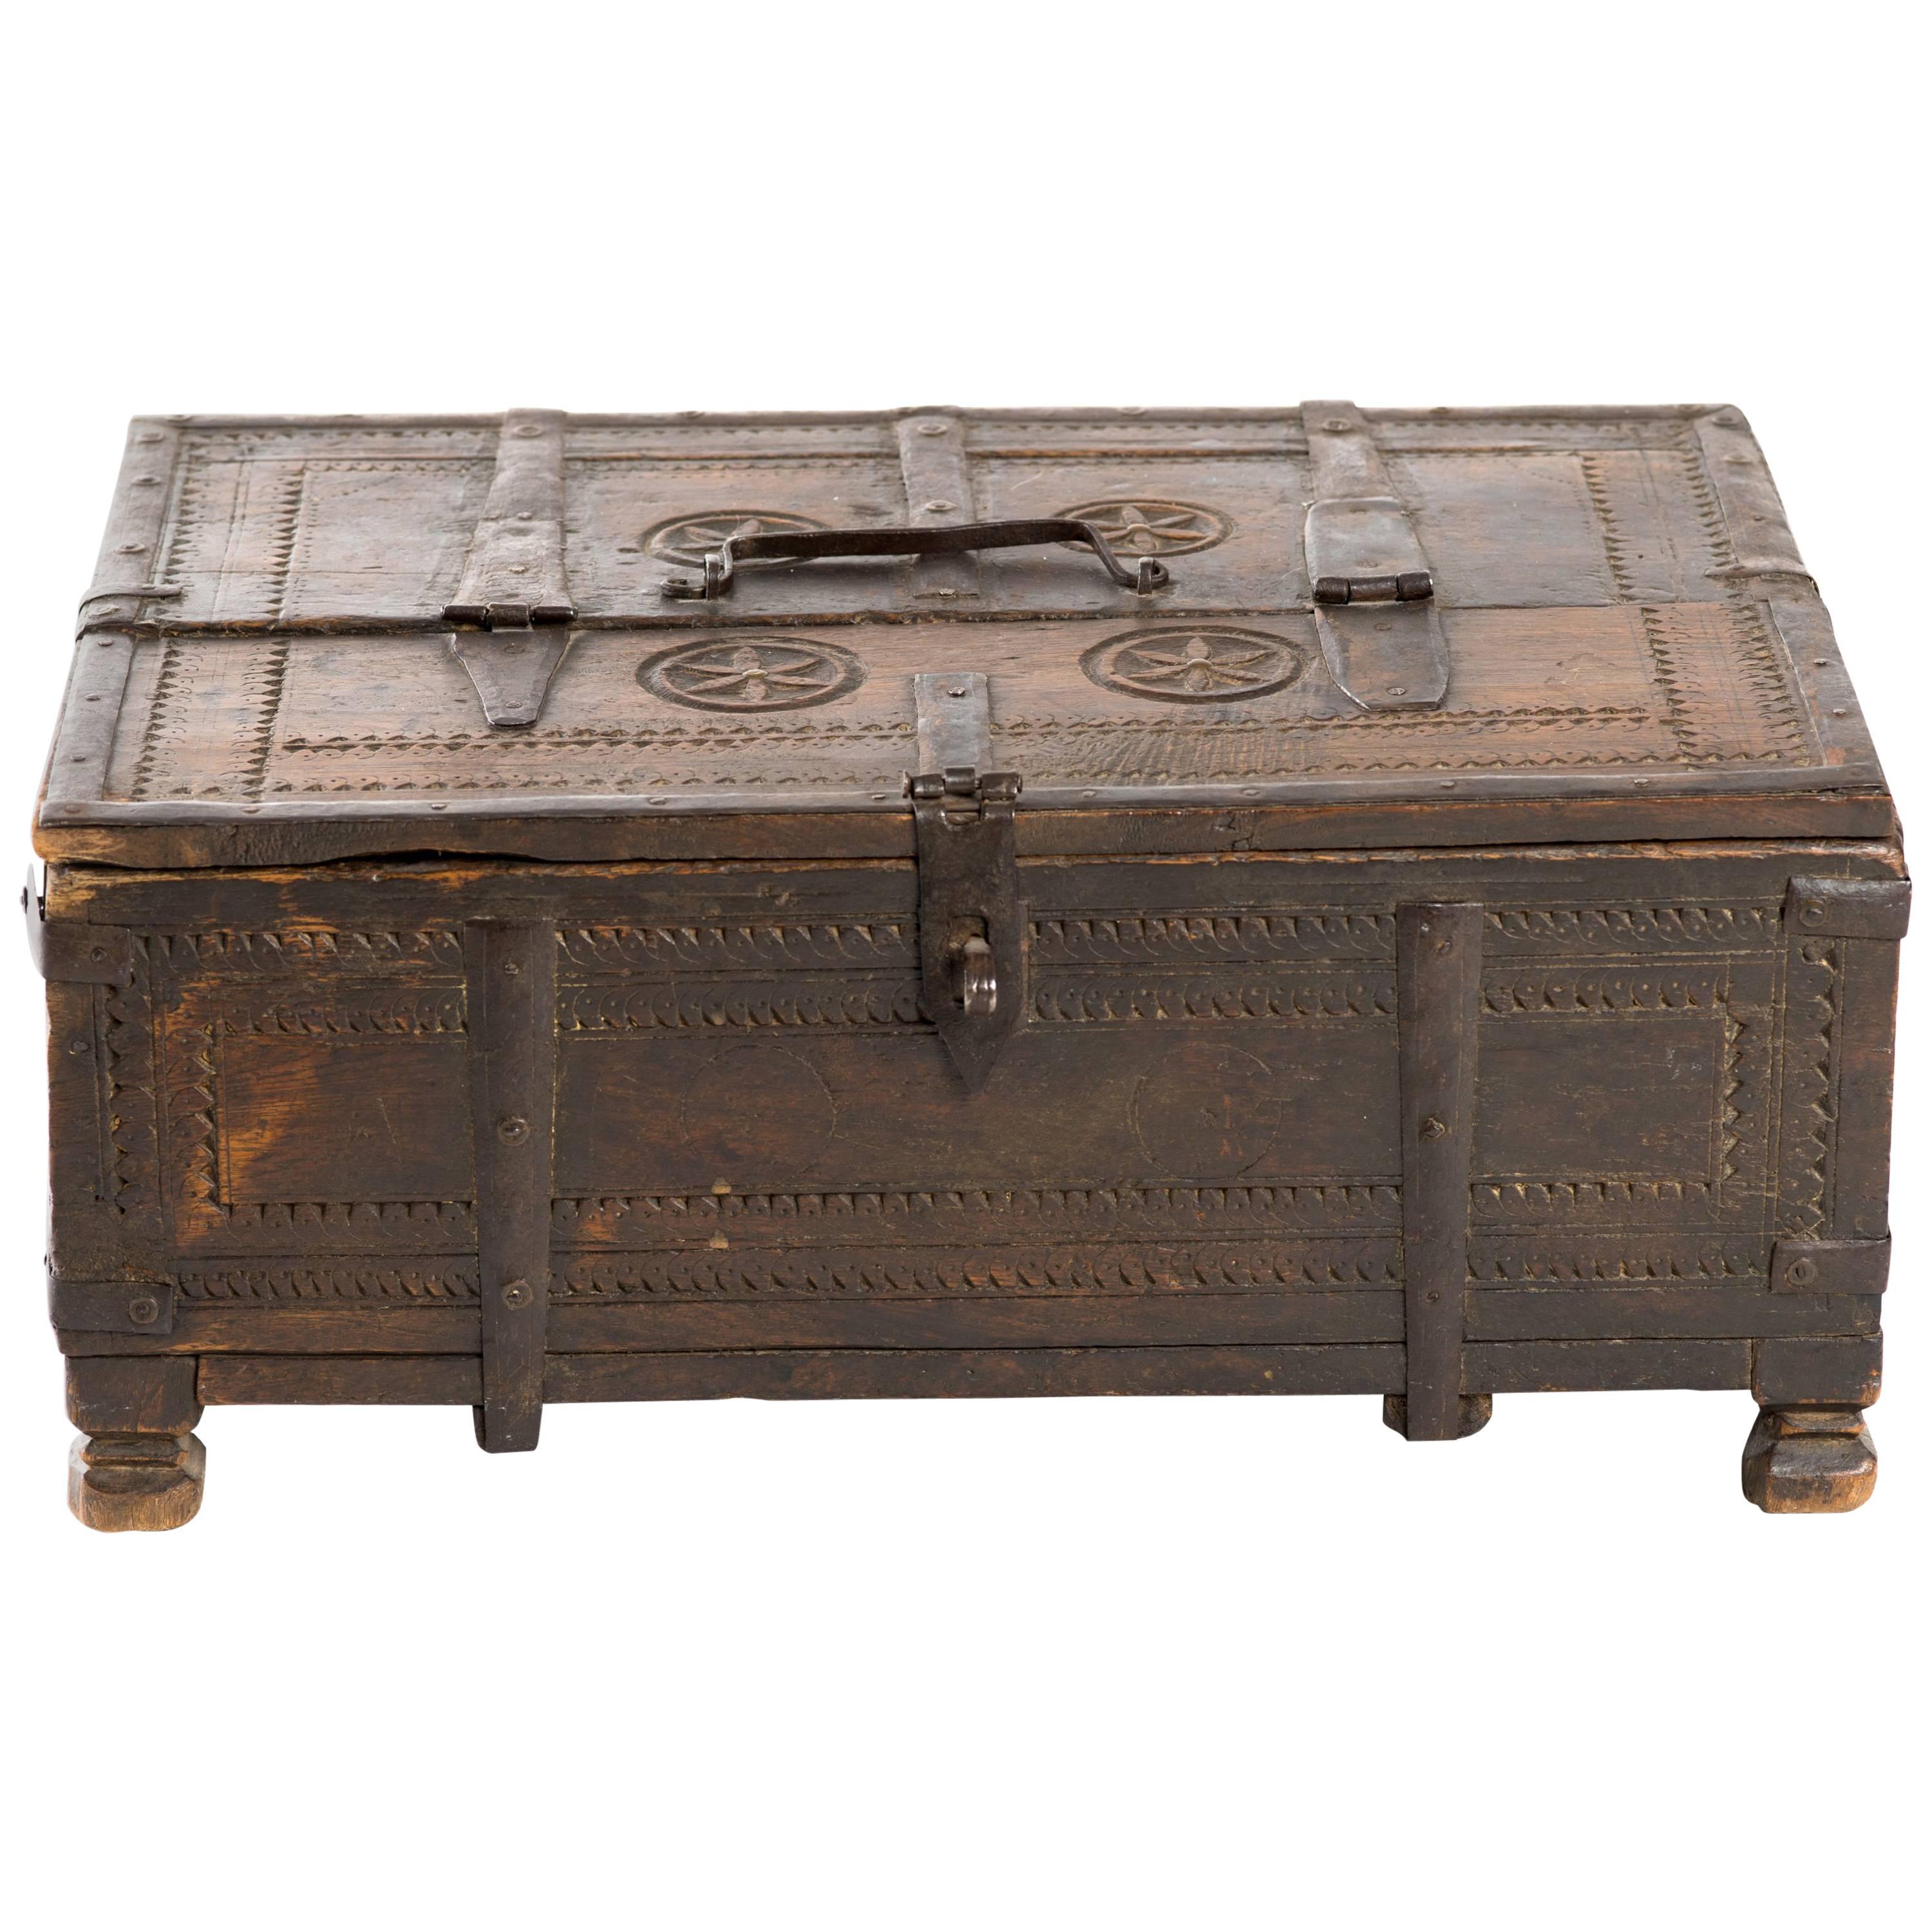 Early 20th Century Indian Carved Wood Storage Chest Box For Sale